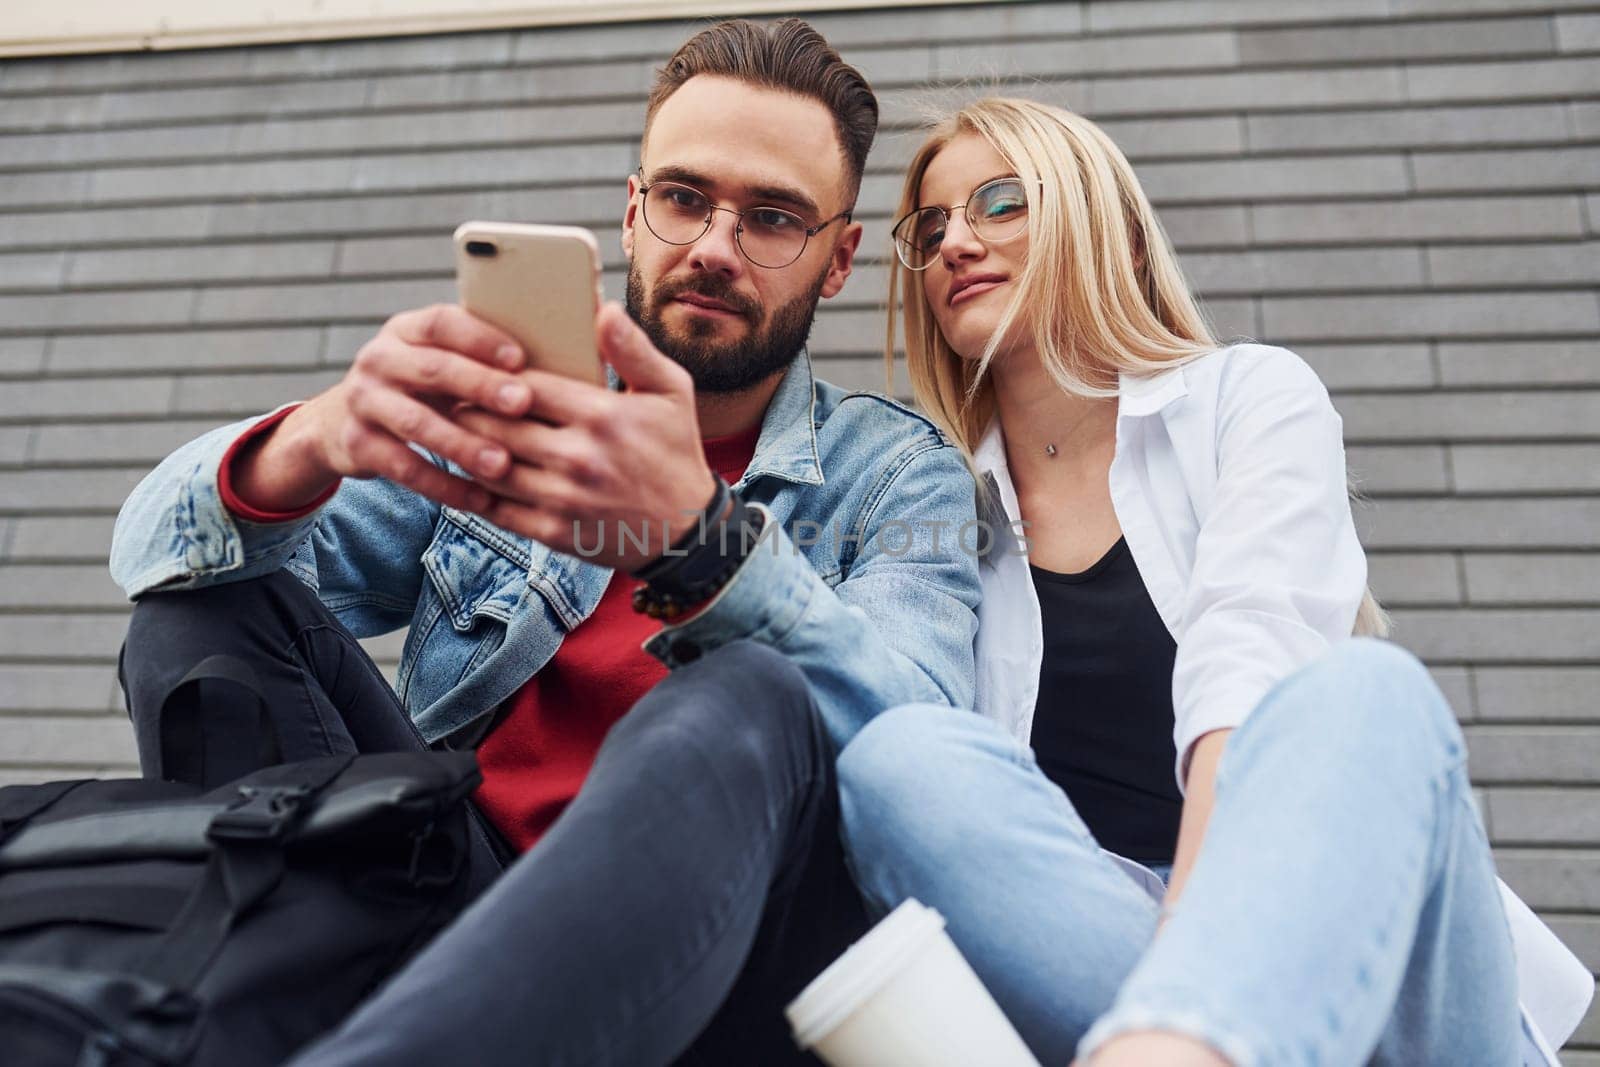 Using phone. Young stylish man with woman in casual clothes sitting outdoors together. Conception of friendship or relationships.